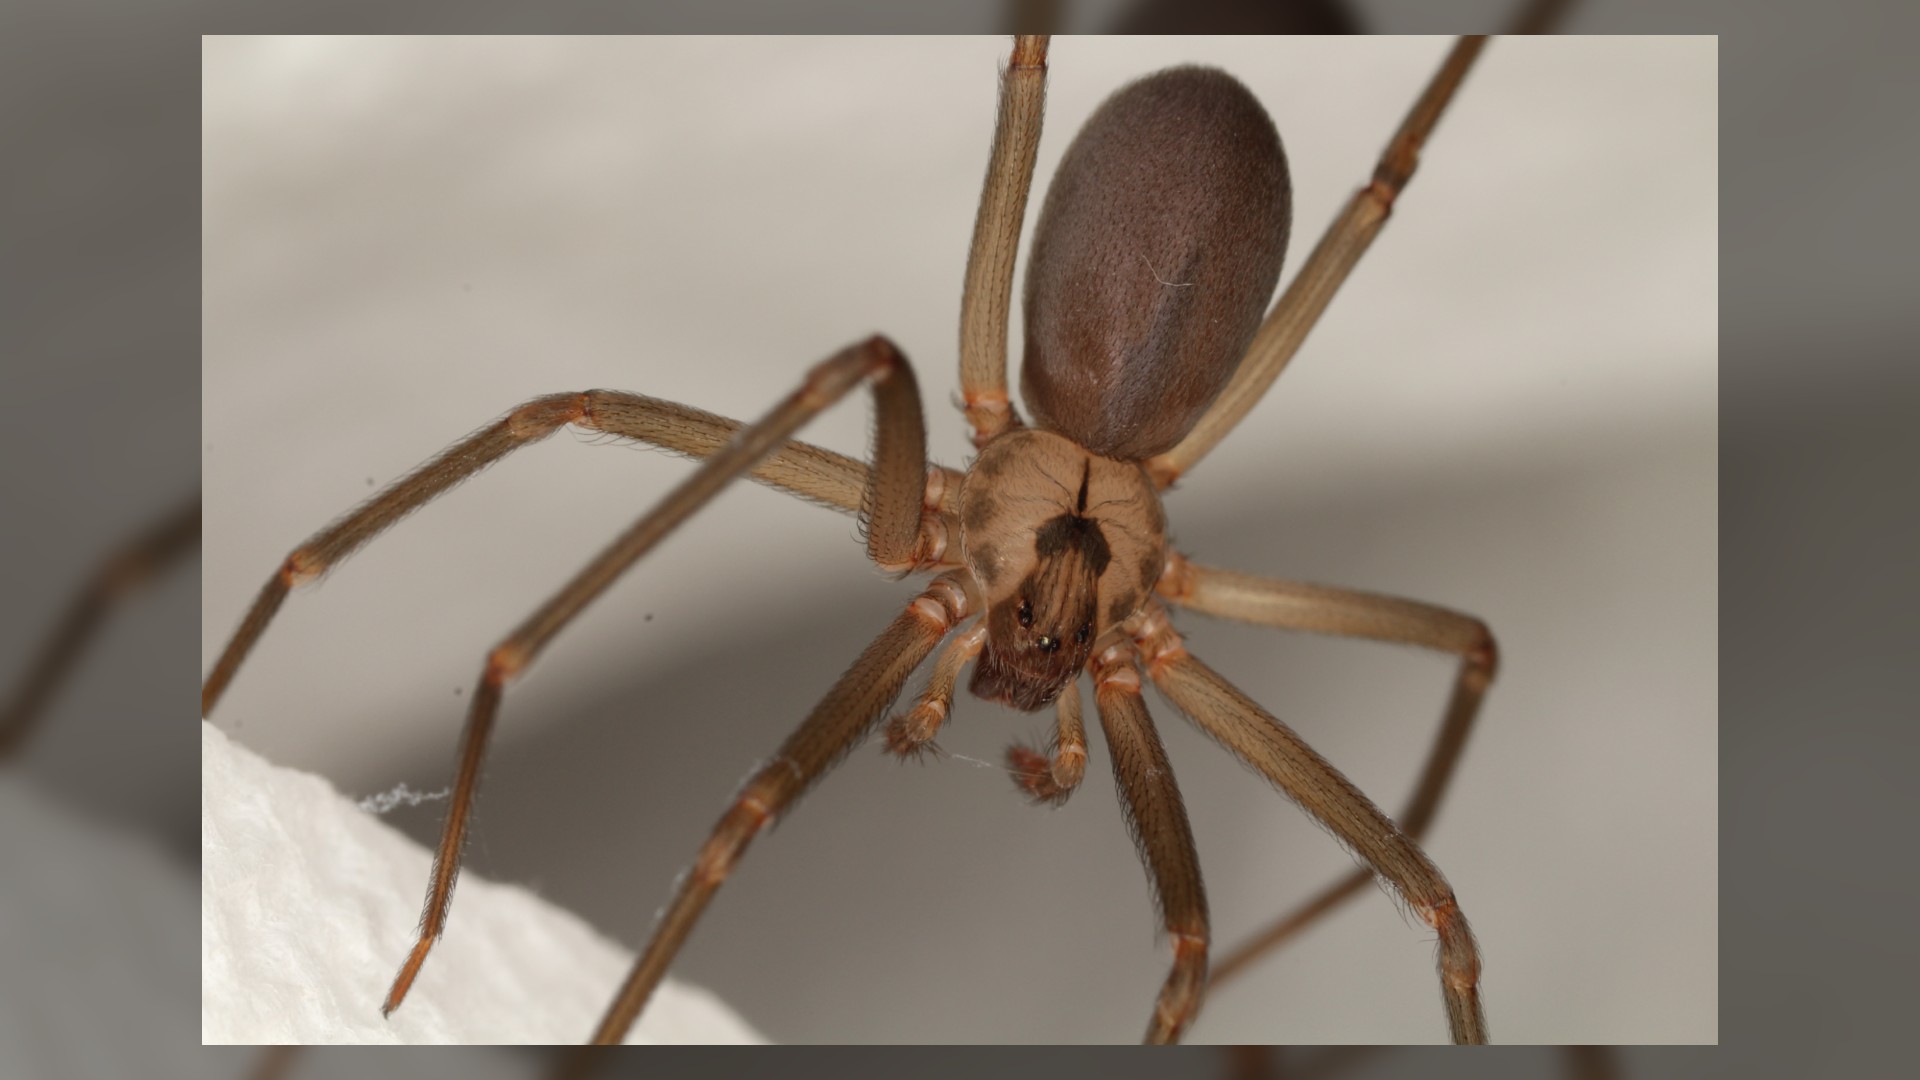 A close-up photo of a brown recluse spider against a gray background.